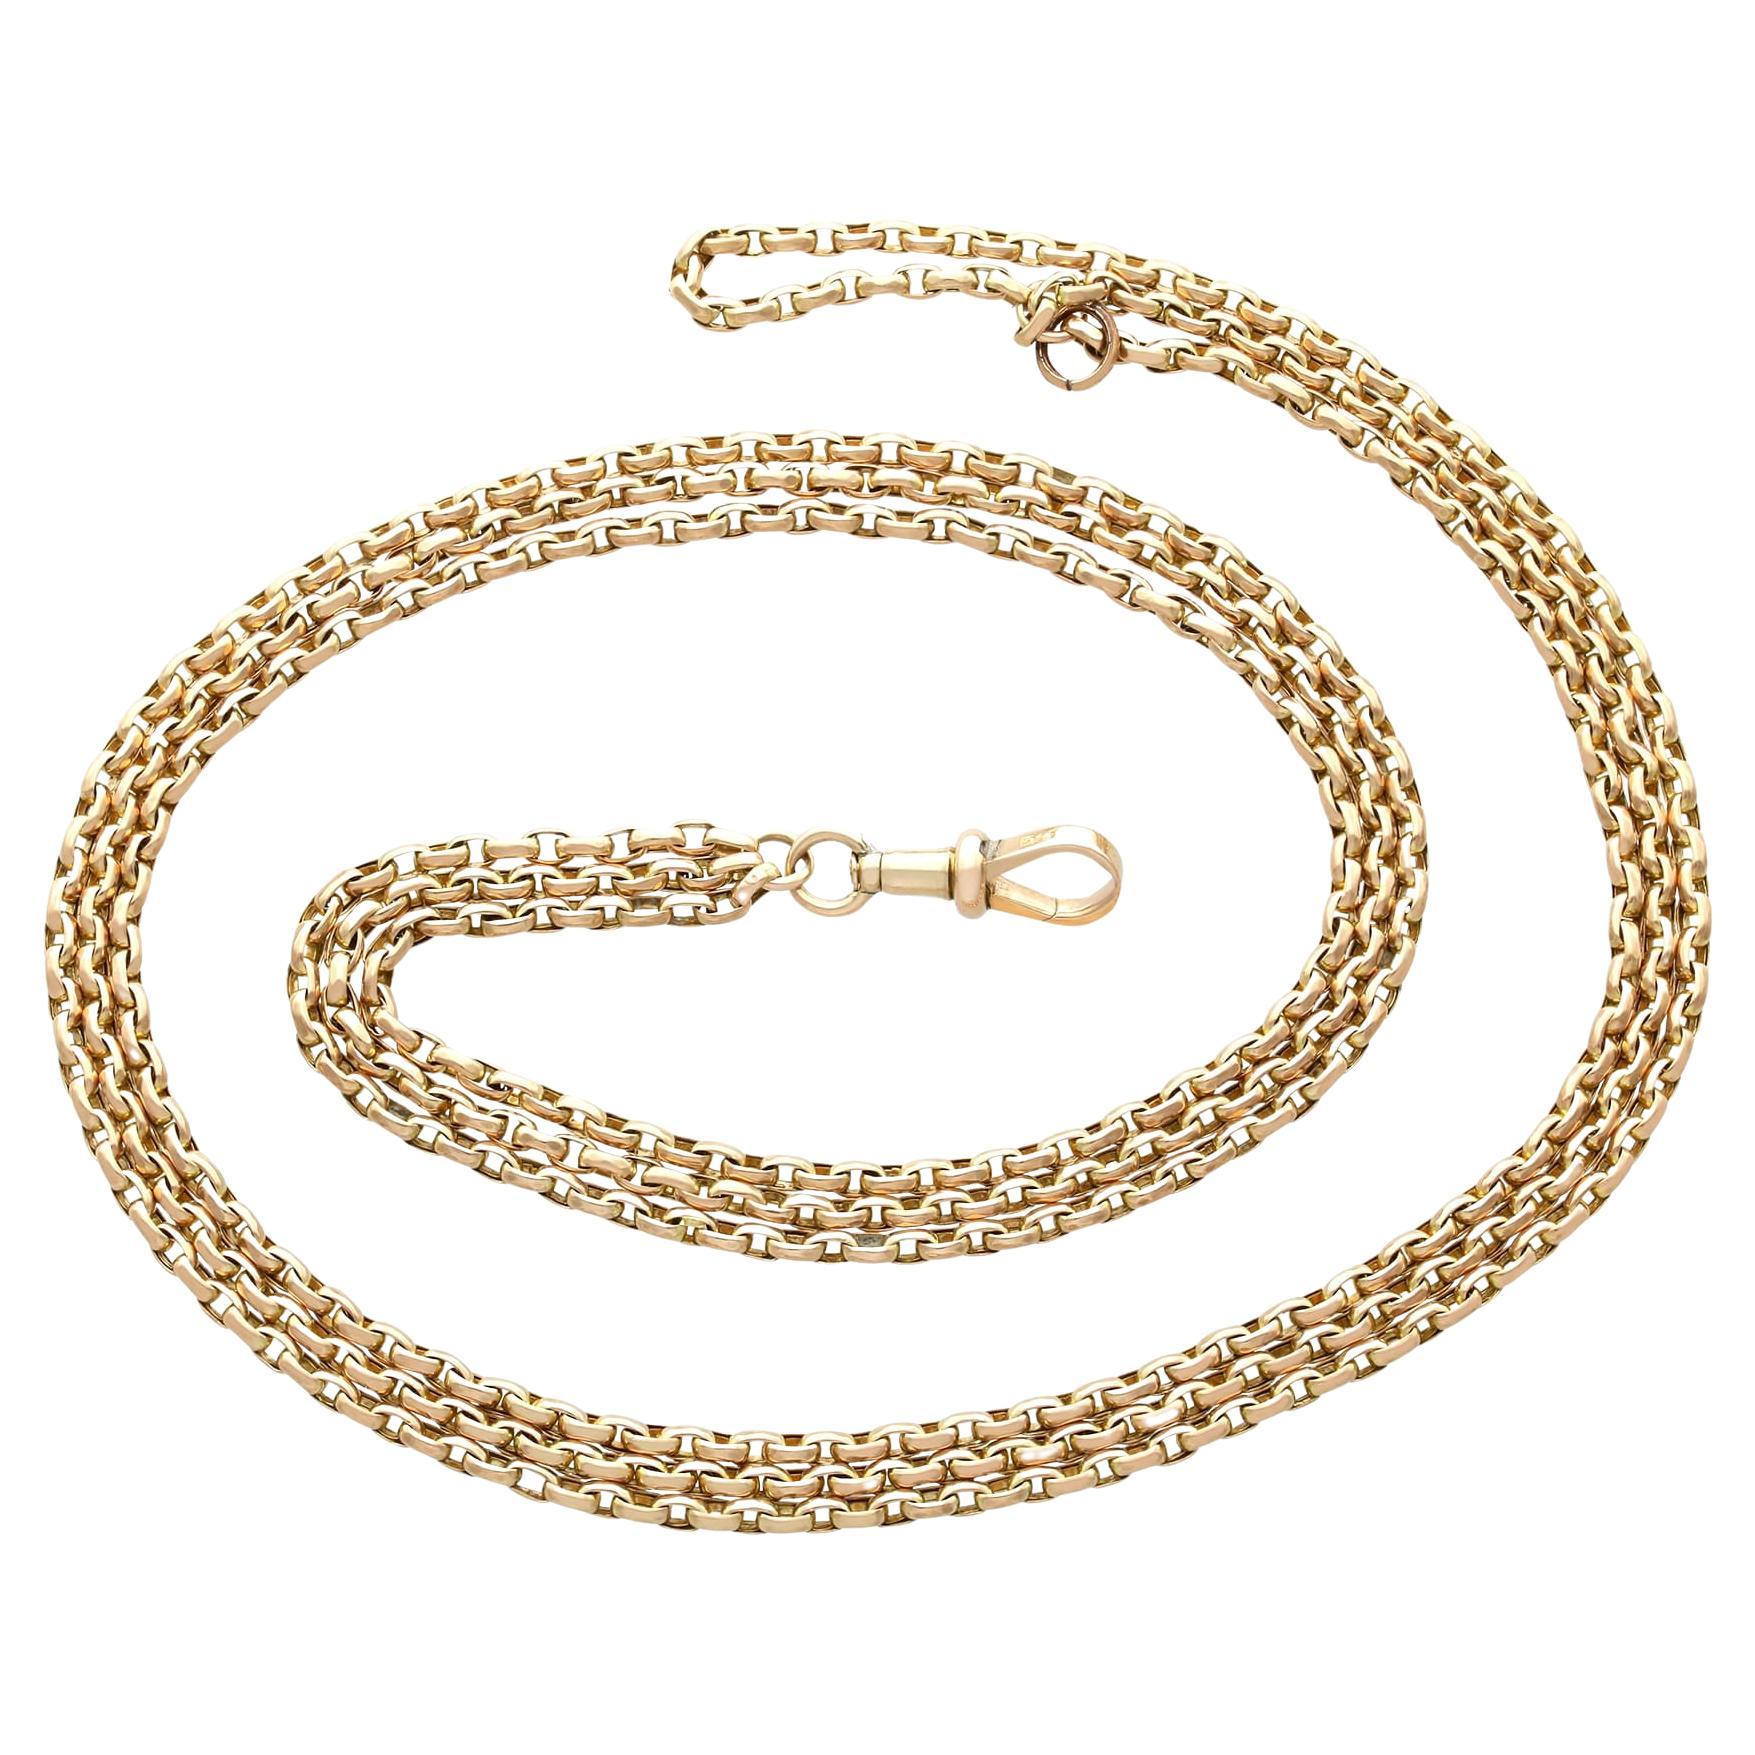 Antique 9k Yellow Gold Longuard Chain Necklace Circa 1900 For Sale